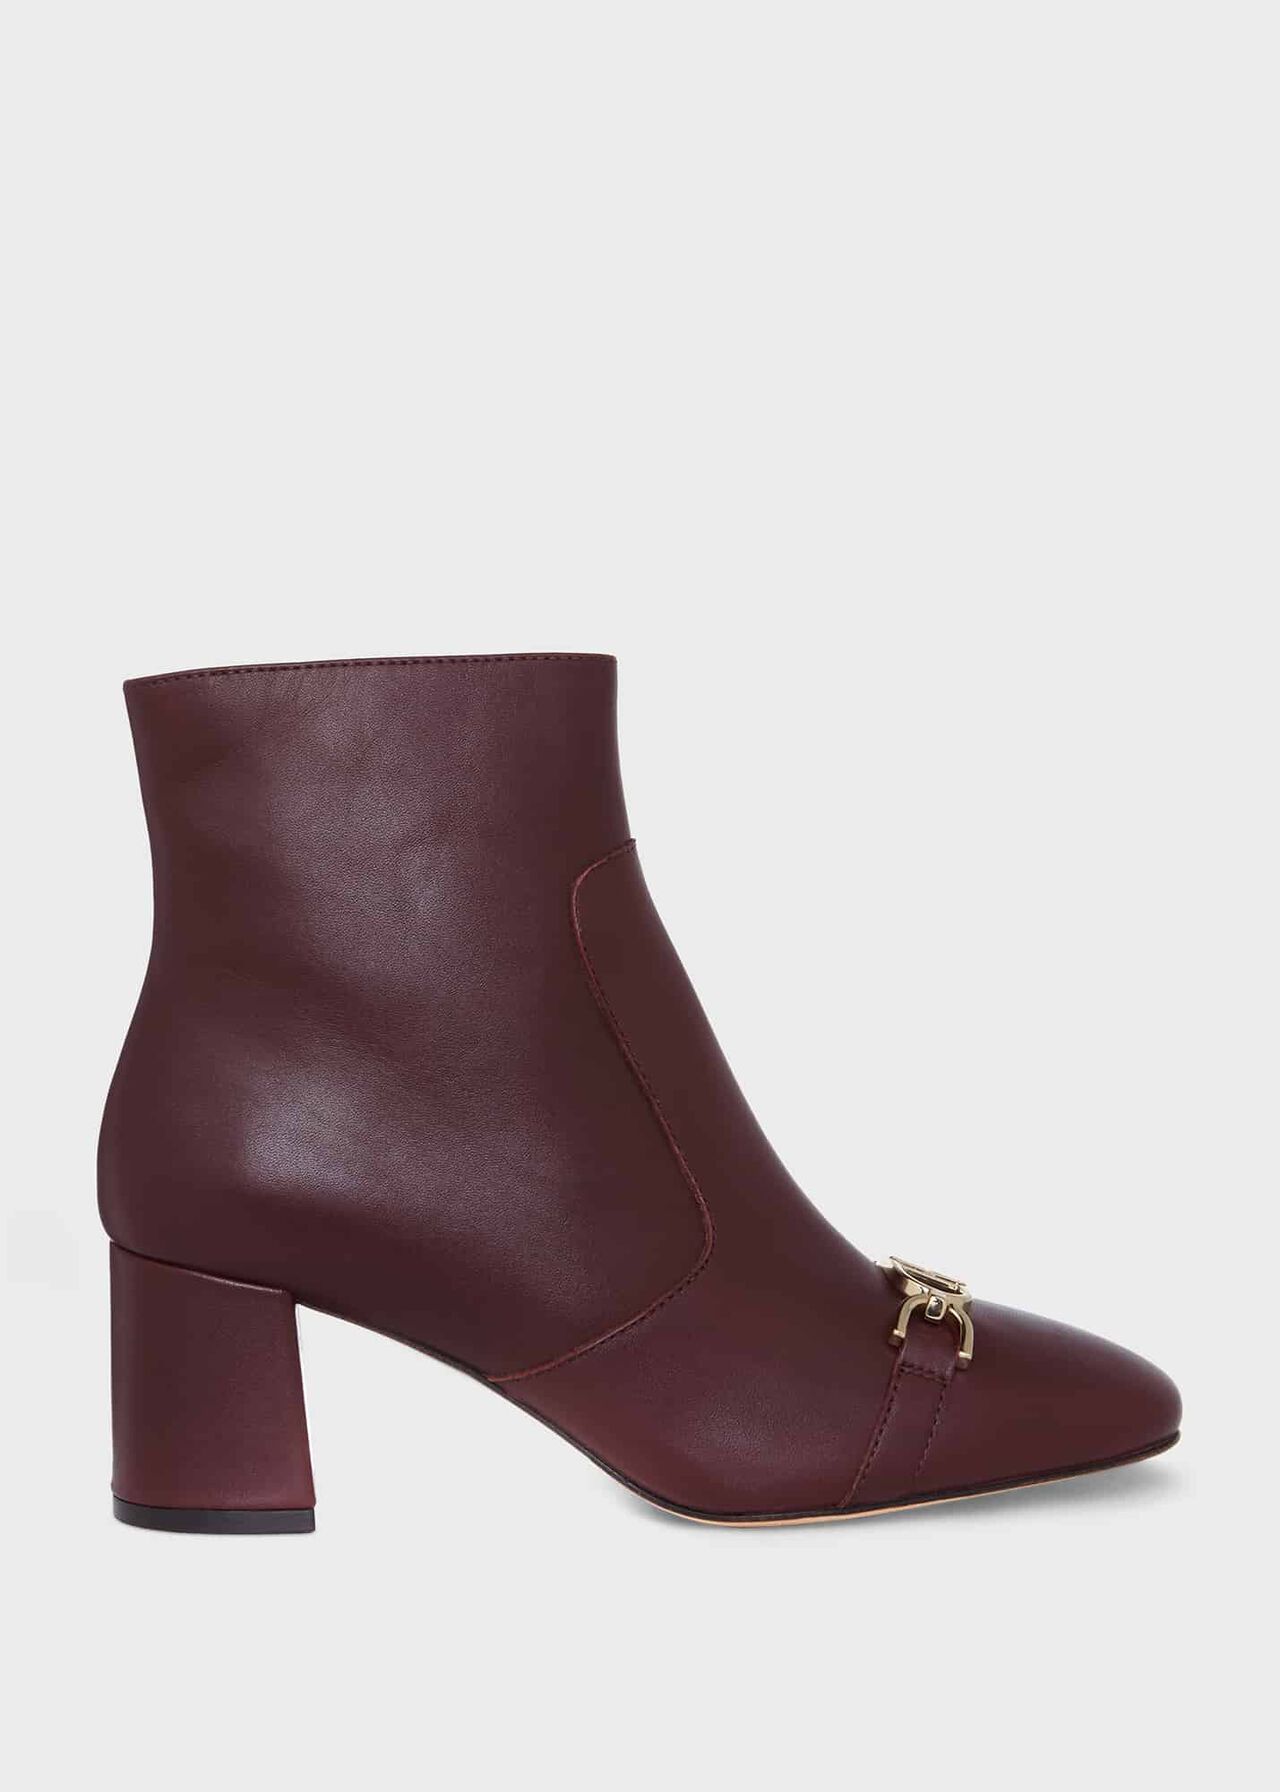 Rosella Trim Ankle Boots, Mahogany Red, hi-res